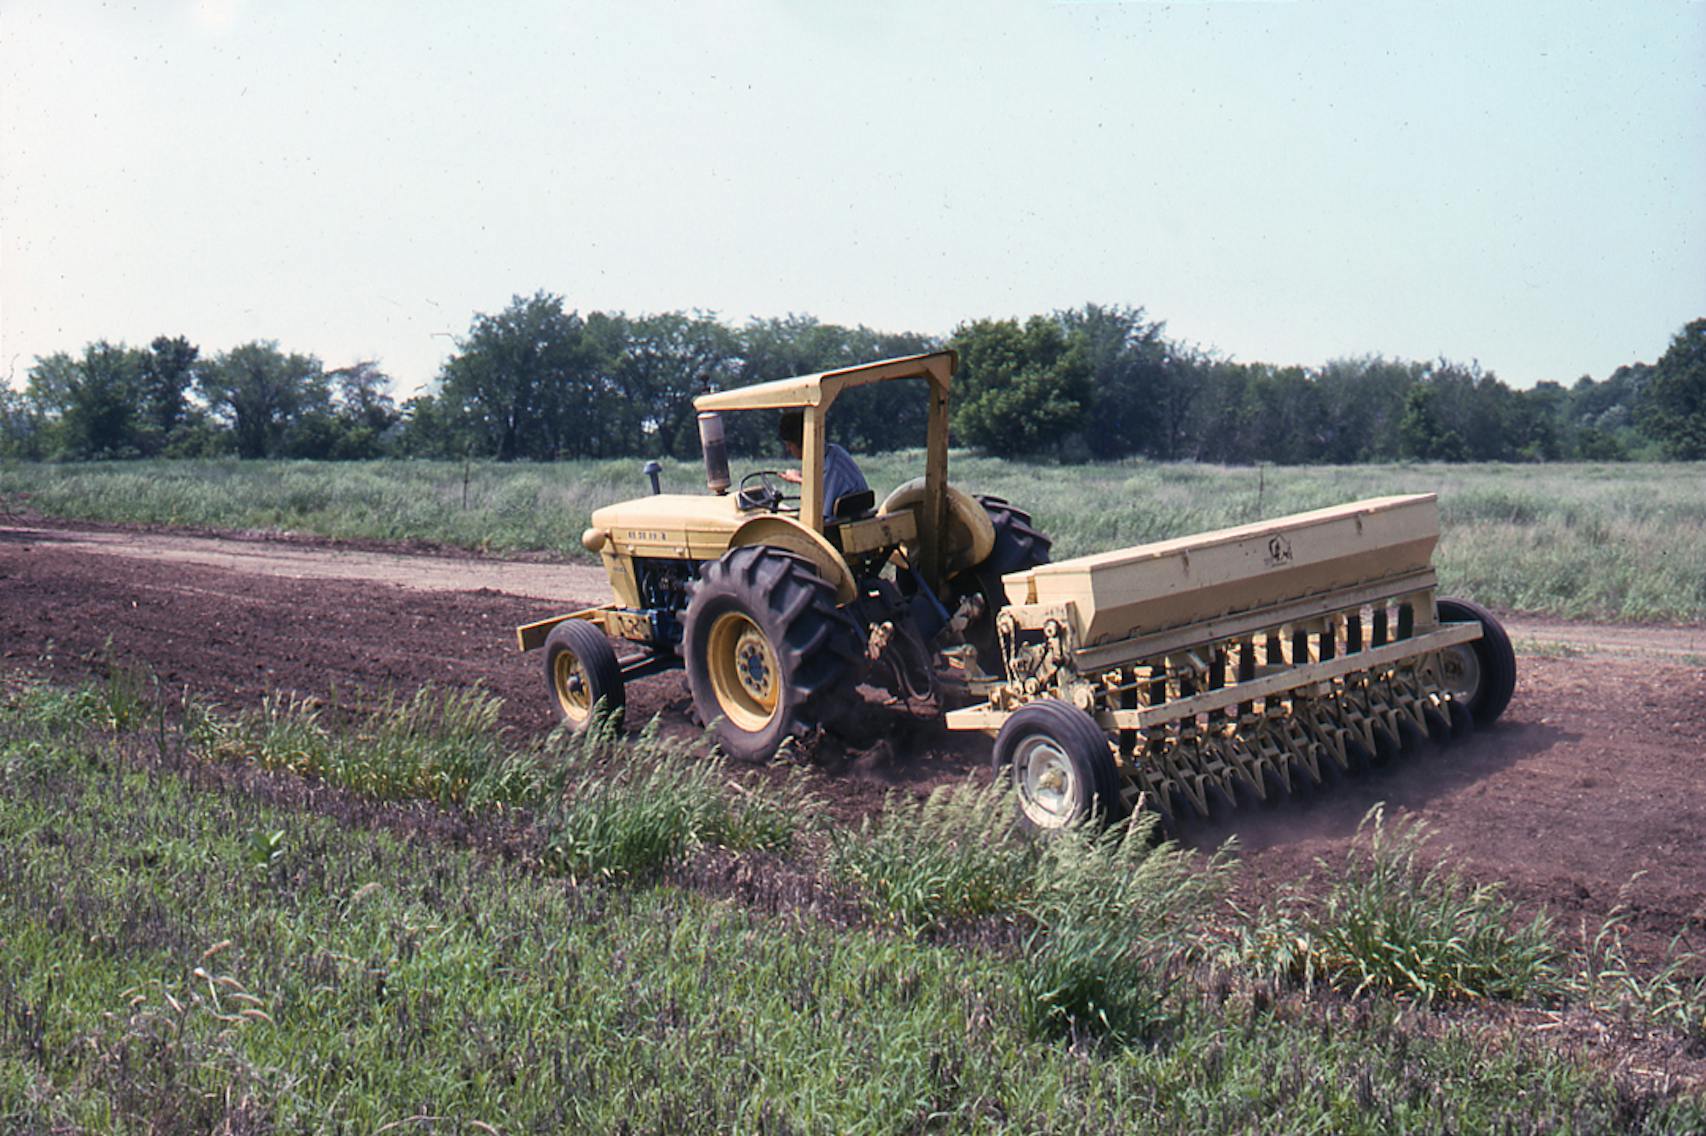 Prairie seed planting using the first Truax seed drill in the 1970s at Crow Hassan Park Reserve.